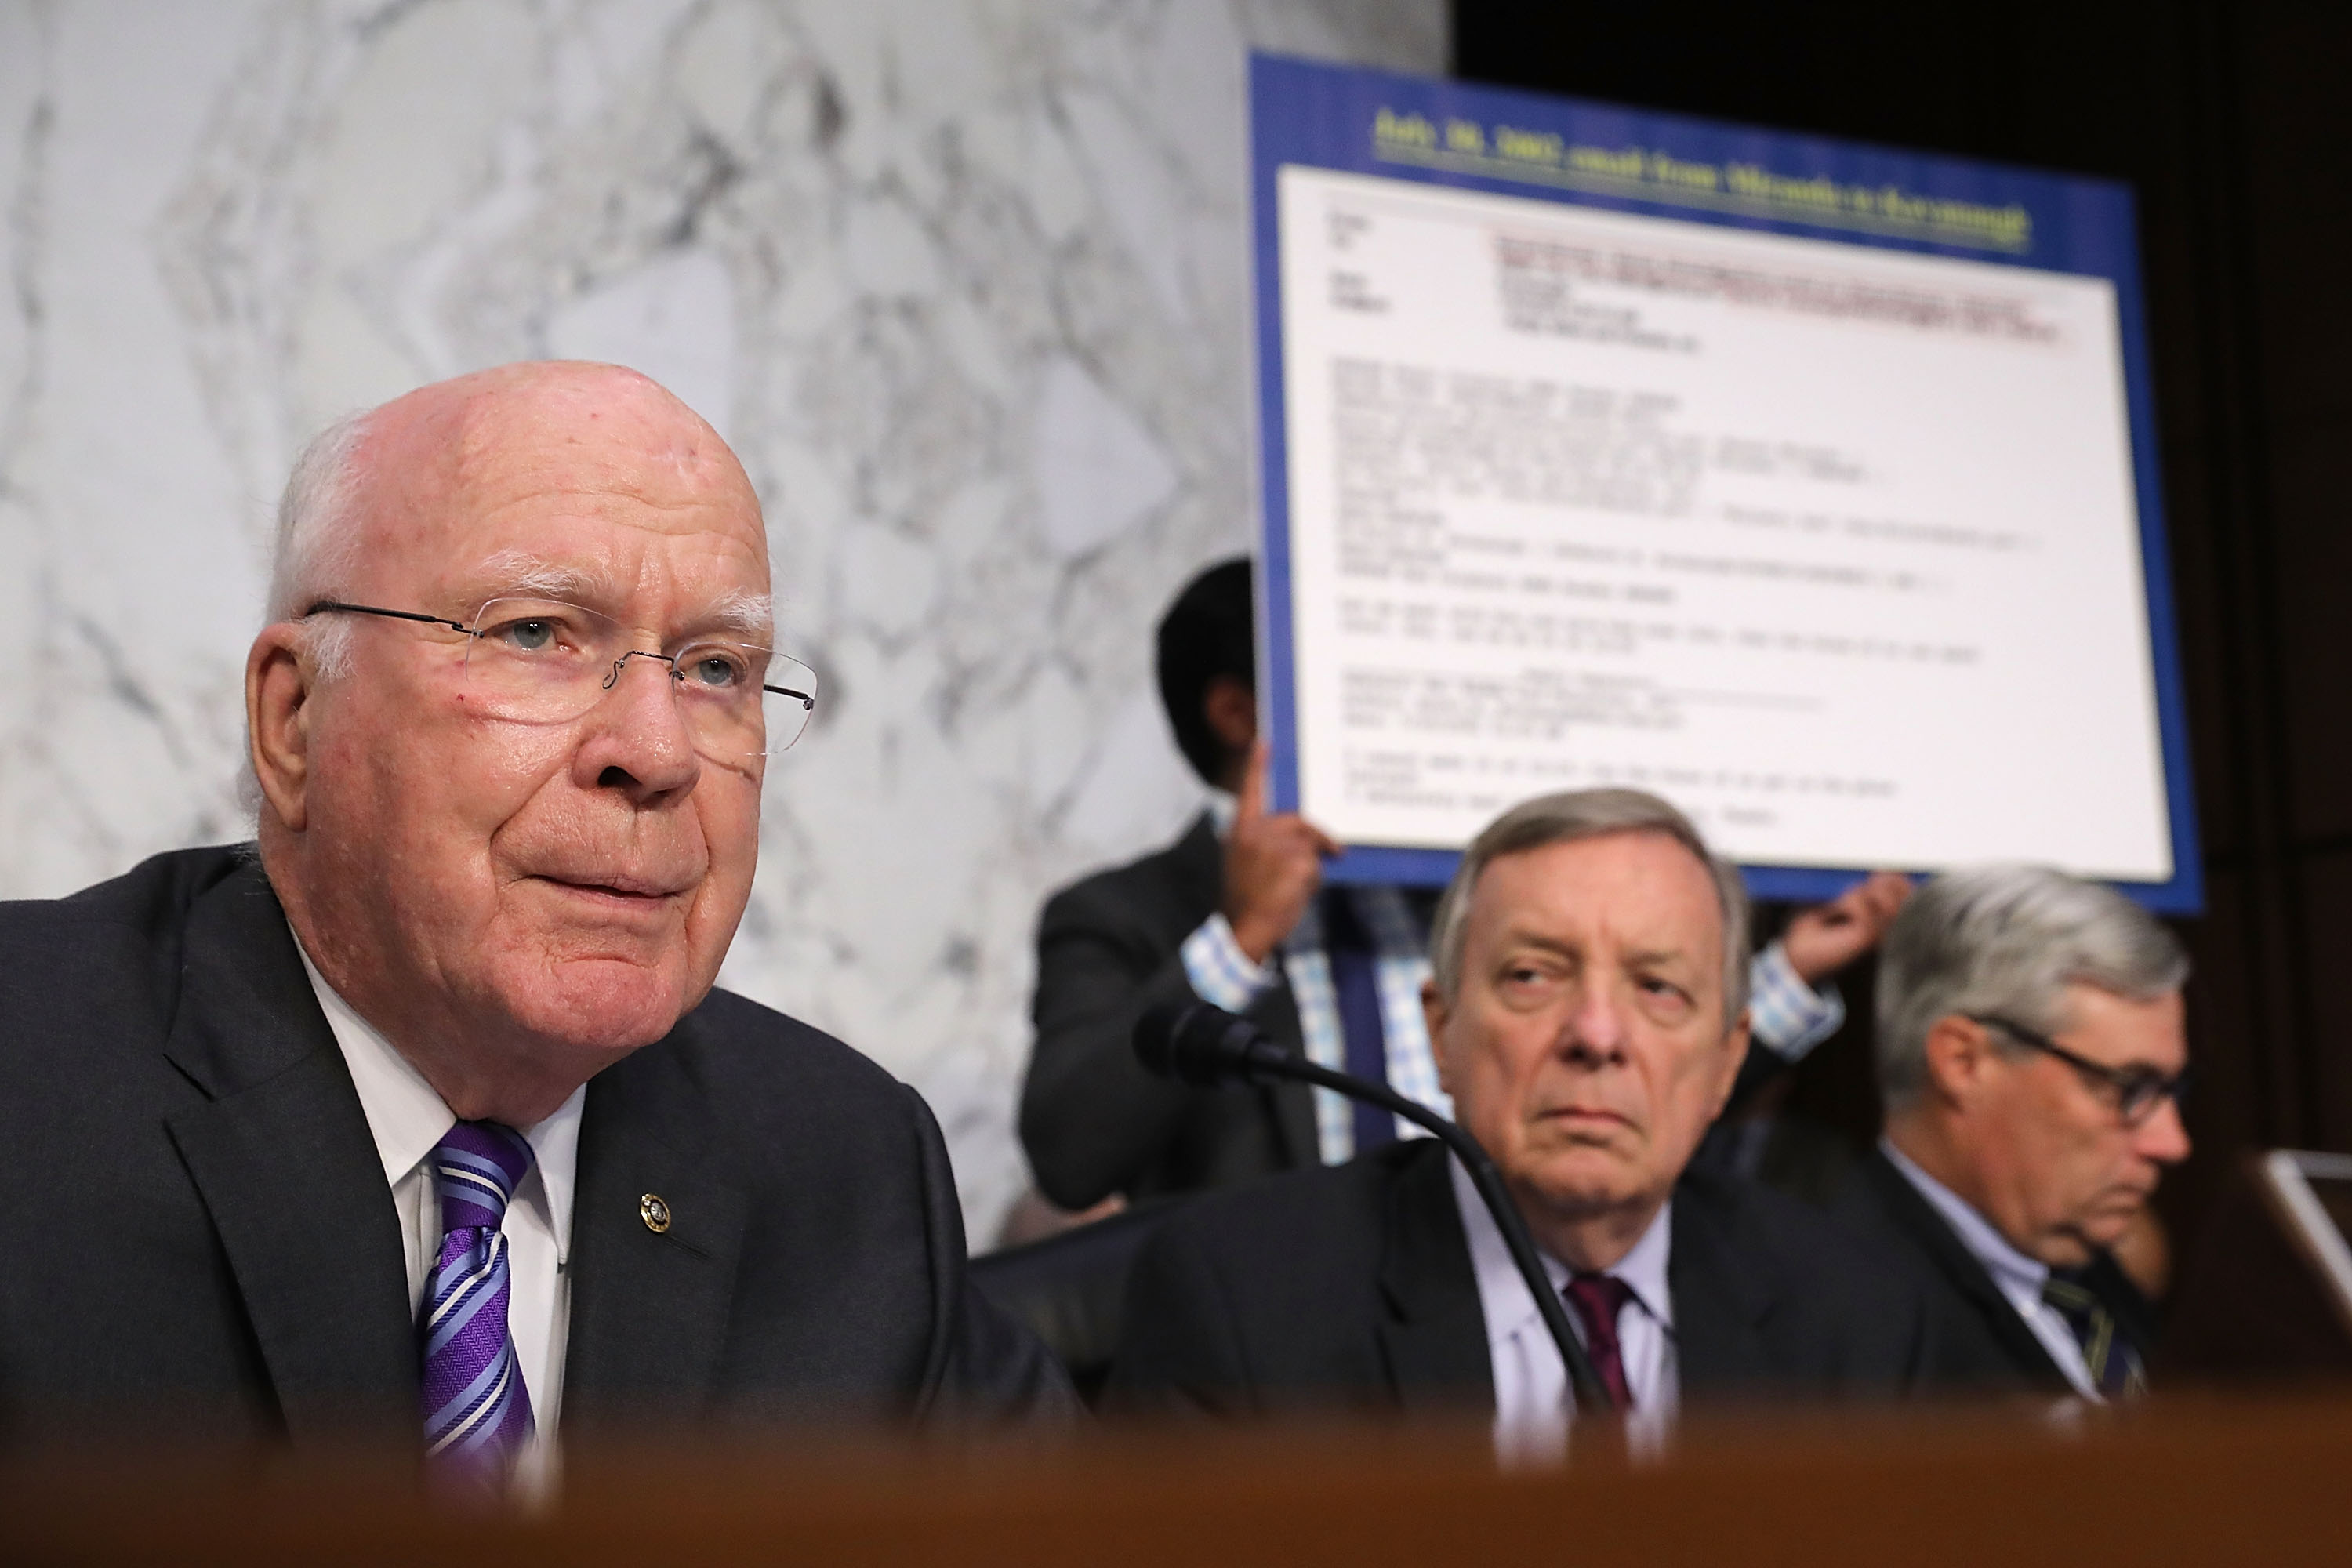 Senate Judiciary Committee member Sen. Patrick Leahy (D-VT) (L) questions Supreme Court nominee Judge Brett Kavanaugh during the second day of his confirmation hearing on Capitol Hill September 5, 2018 in Washington, DC.